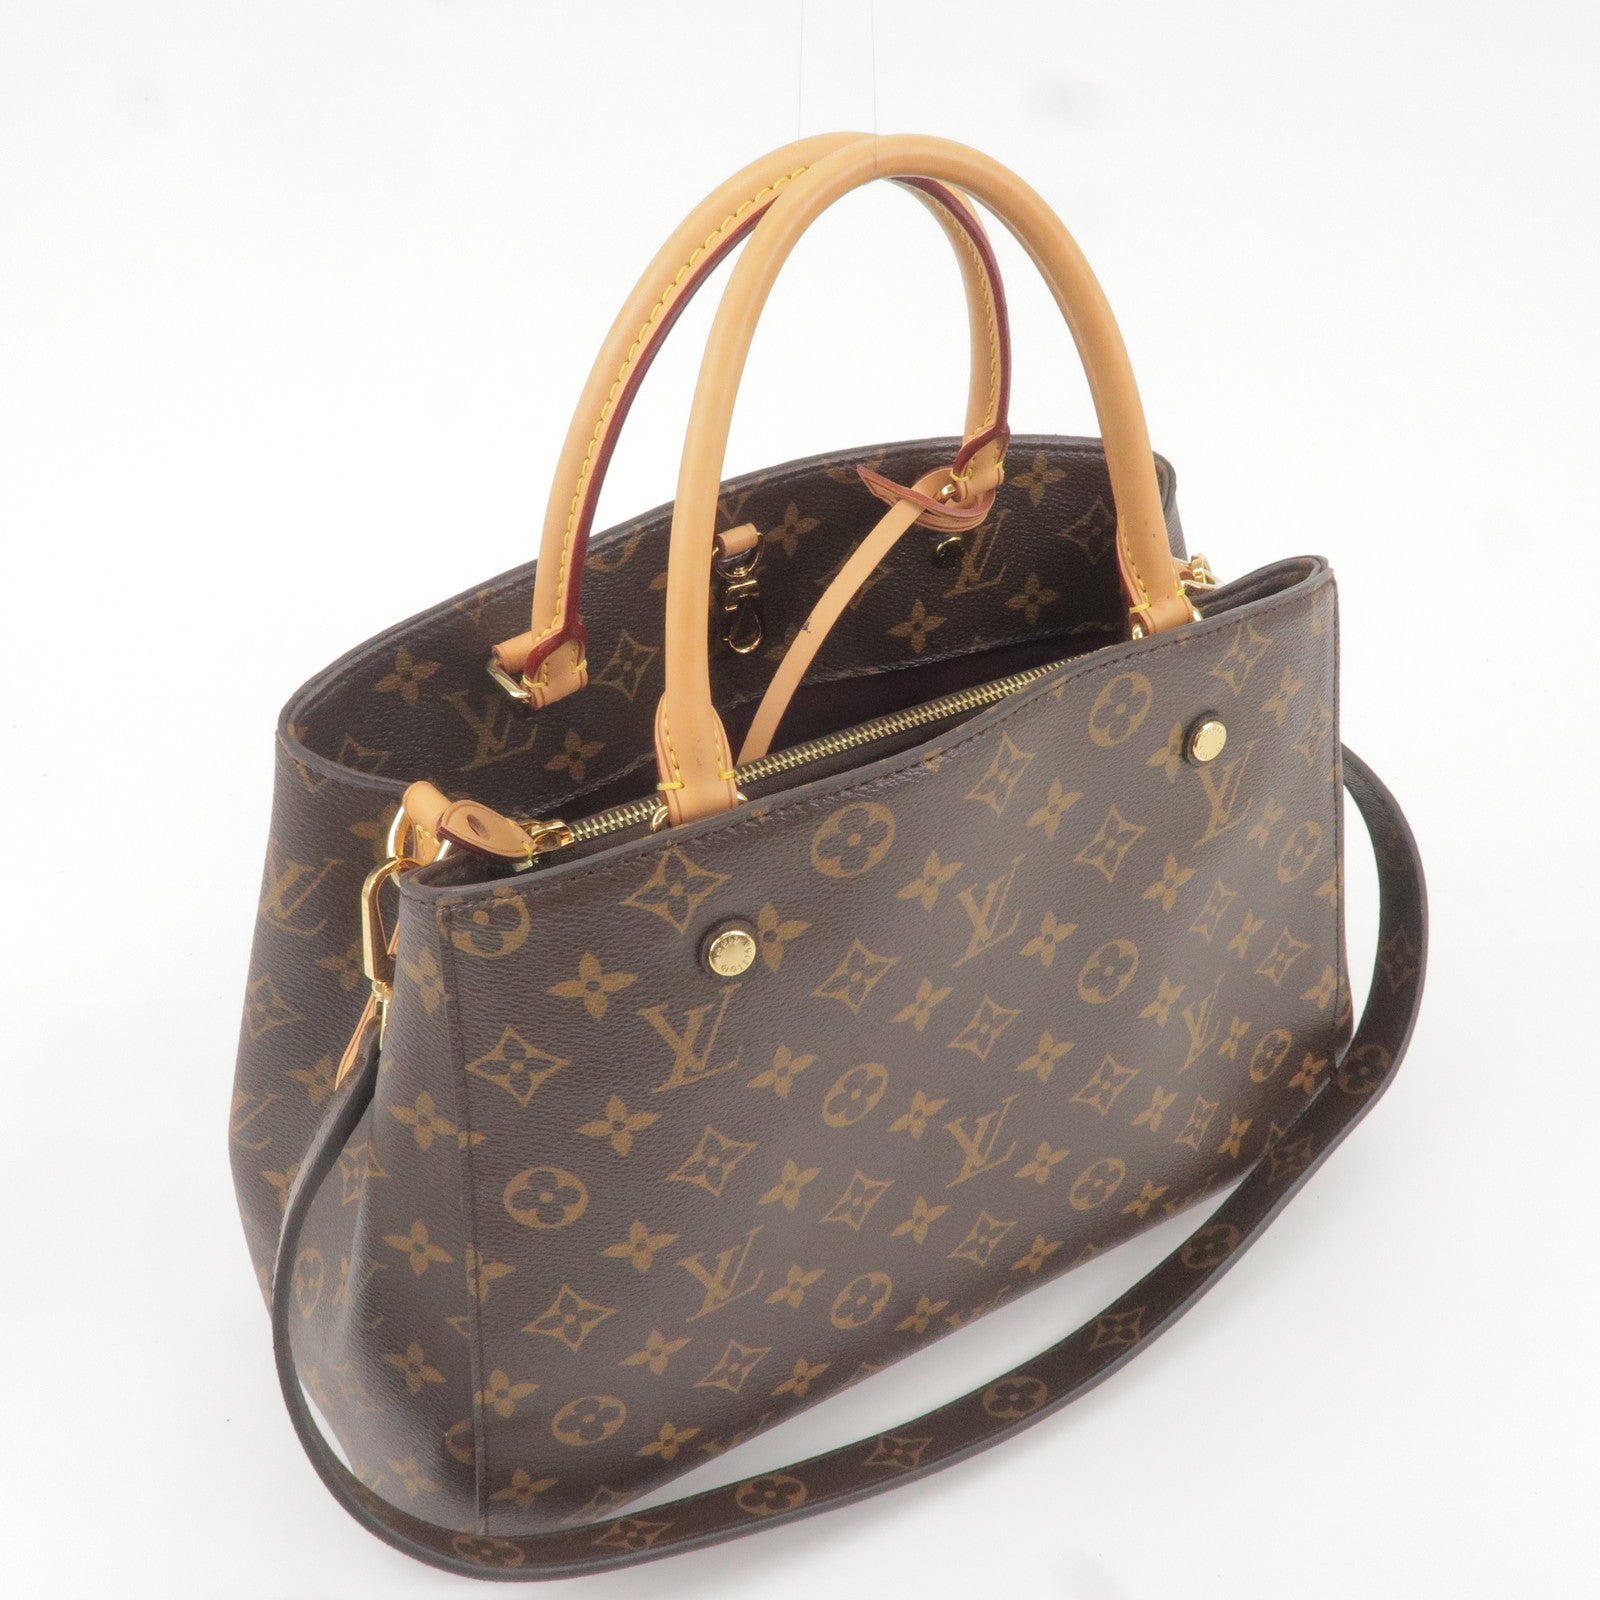 How I pack my Bag:Louis Vuitton Montaigne MM 